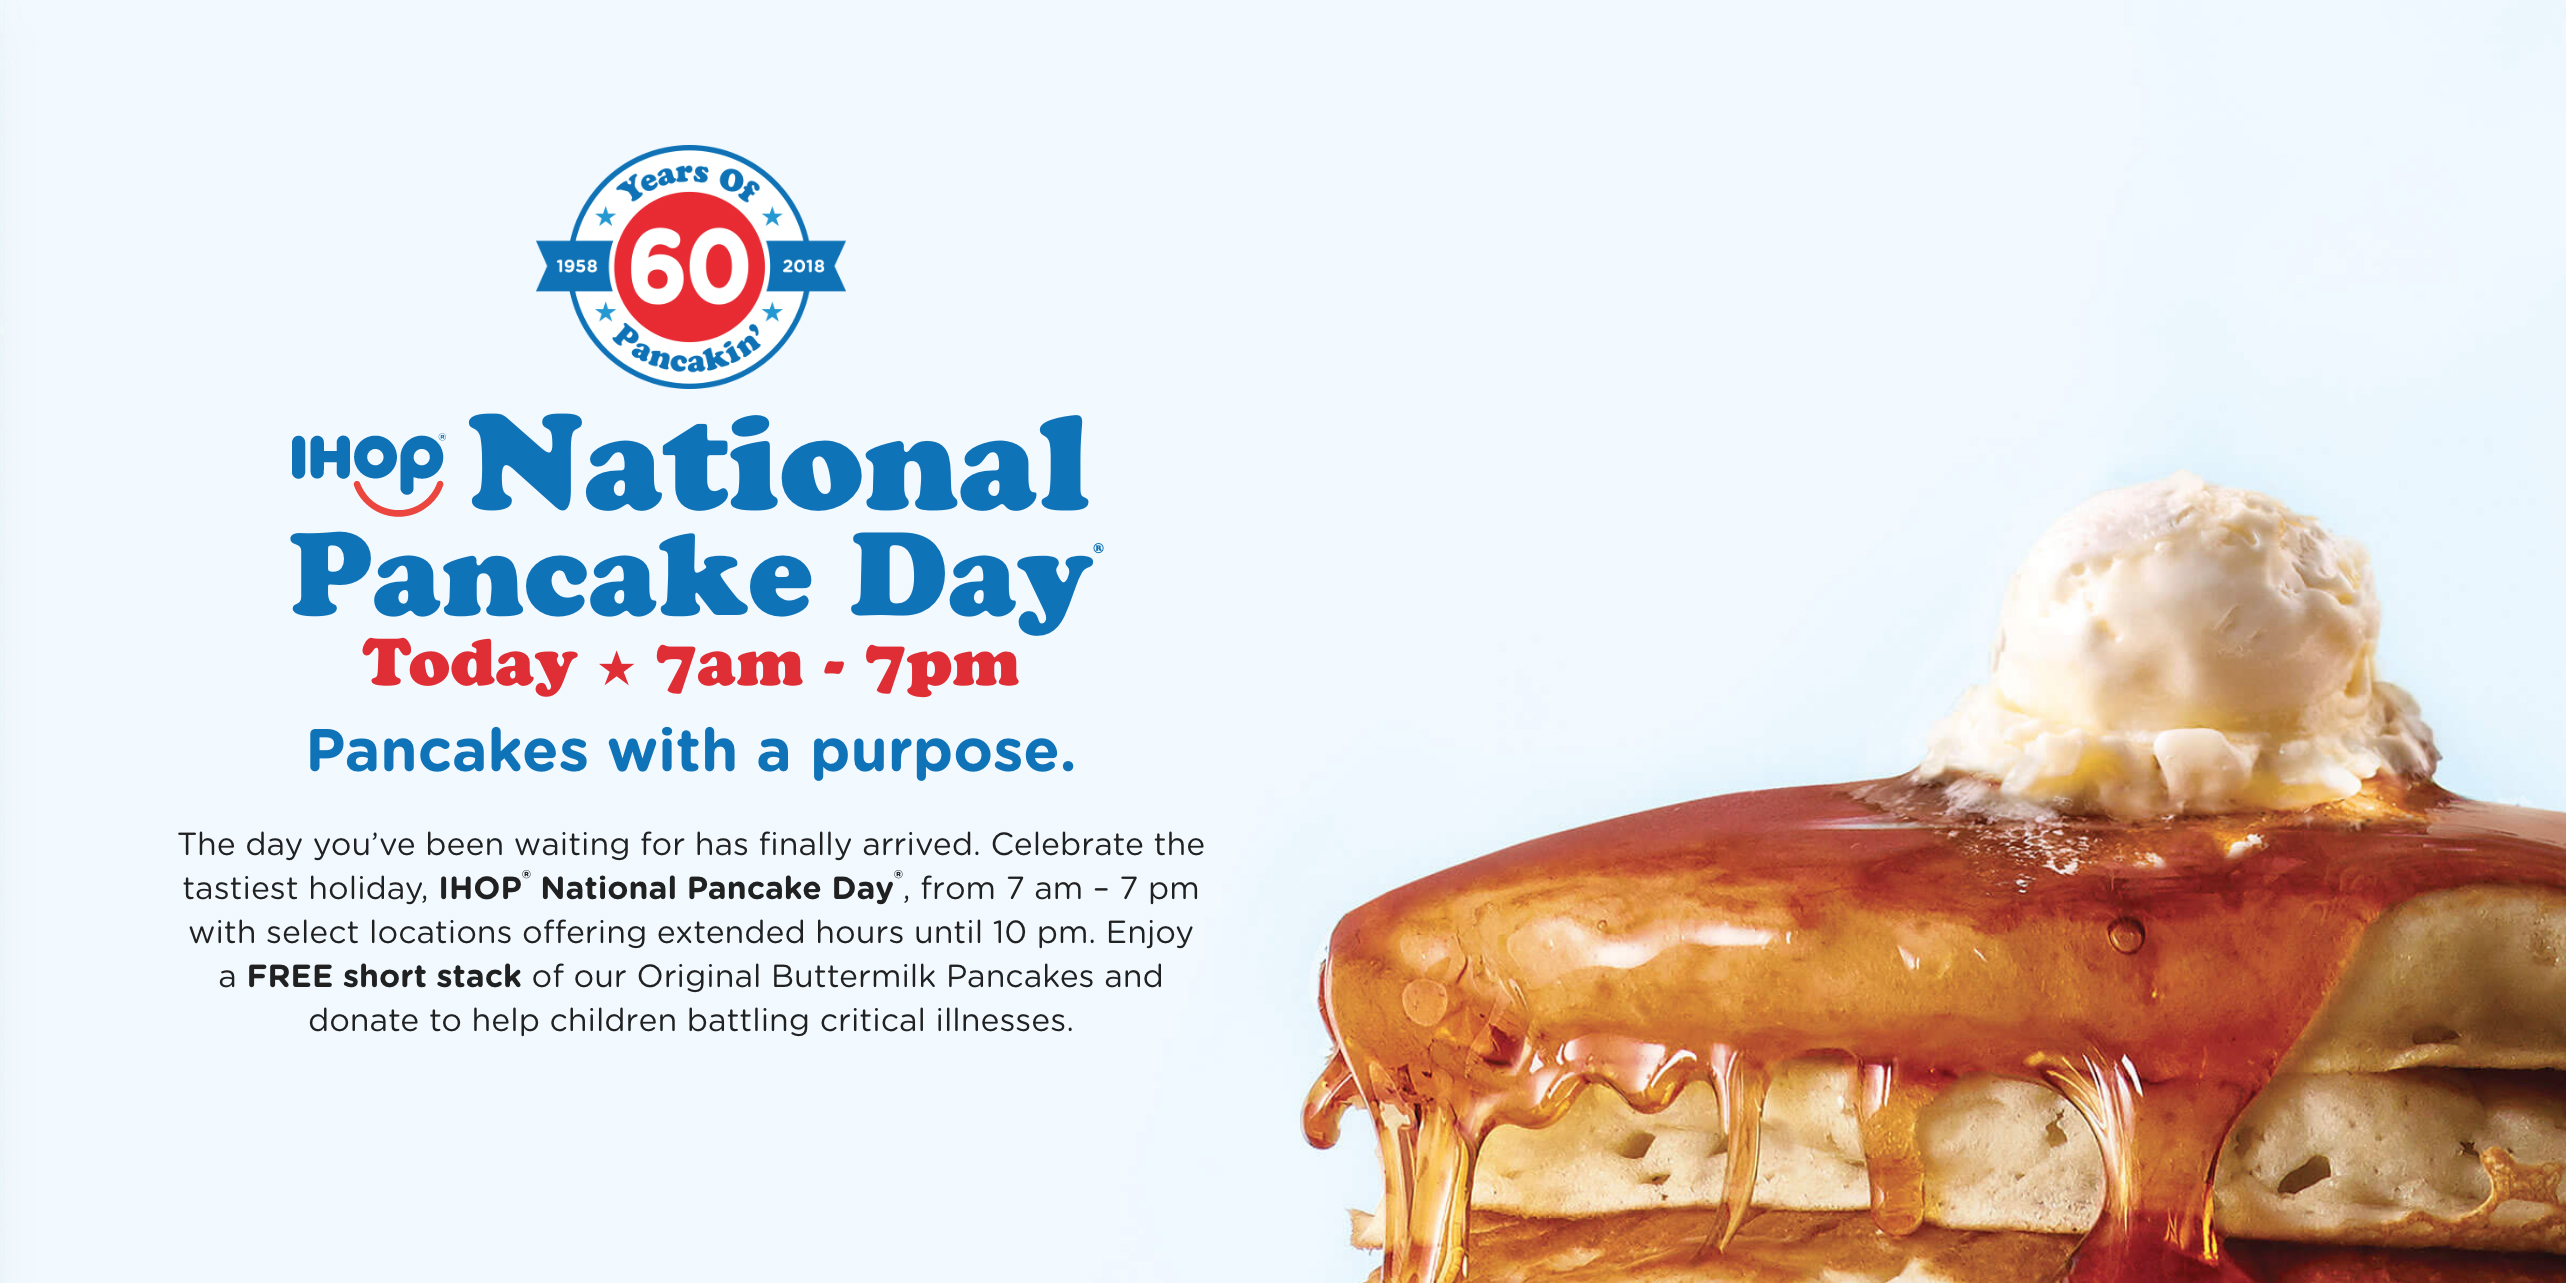 IHOP is celebrating National Pancake Day w/ a free short stack, today only